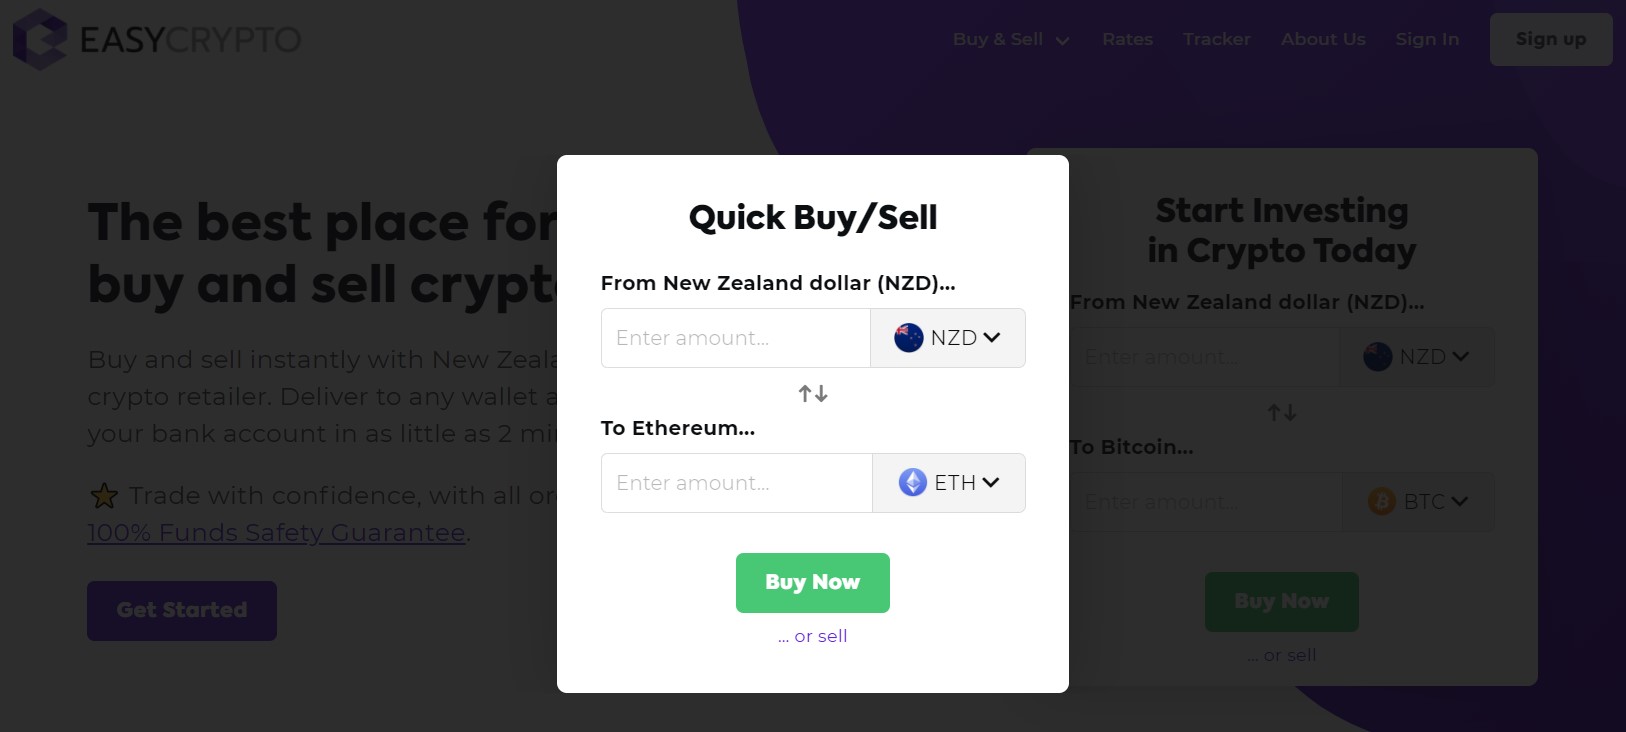 The screenshot of Easy Crypto quick buy and sell features